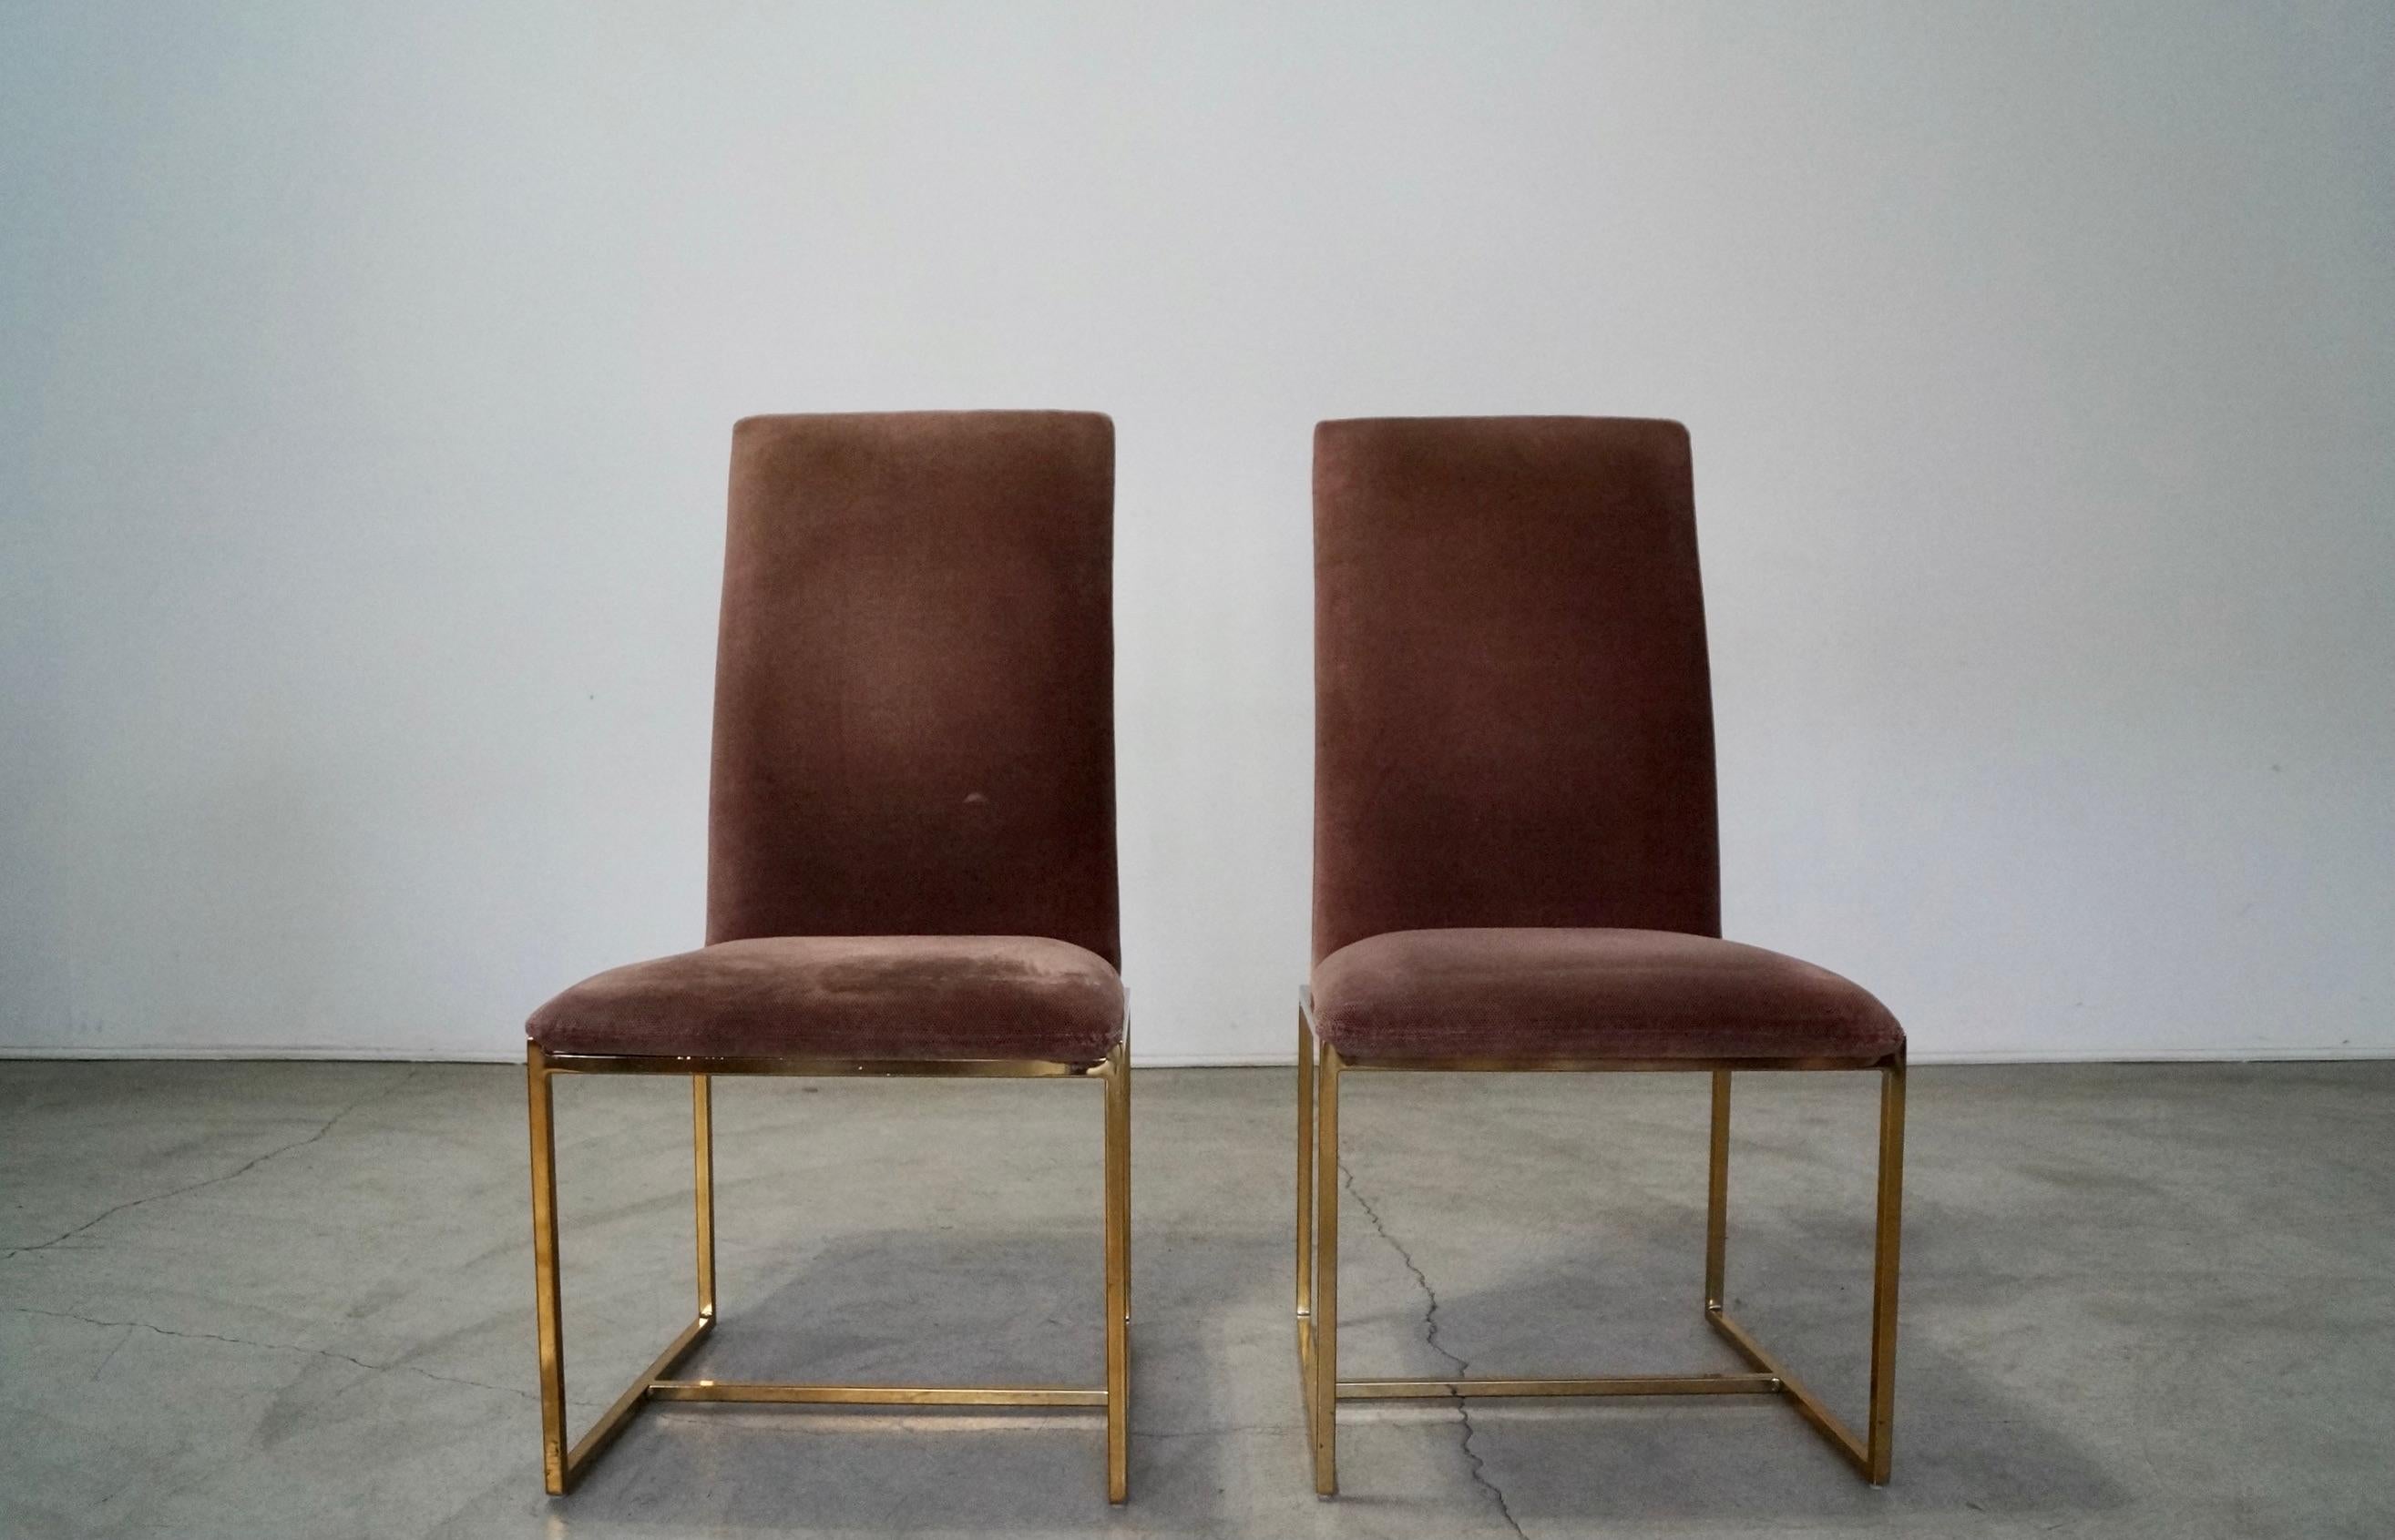 Vintage pair of 1970’s Mid-century Modern dining chairs for sale. They have a brass base with the original vintage velvet-like fabric in a dark mauve. Very well made chairs. The fabric is in good vintage condition with no rips or tears, but show